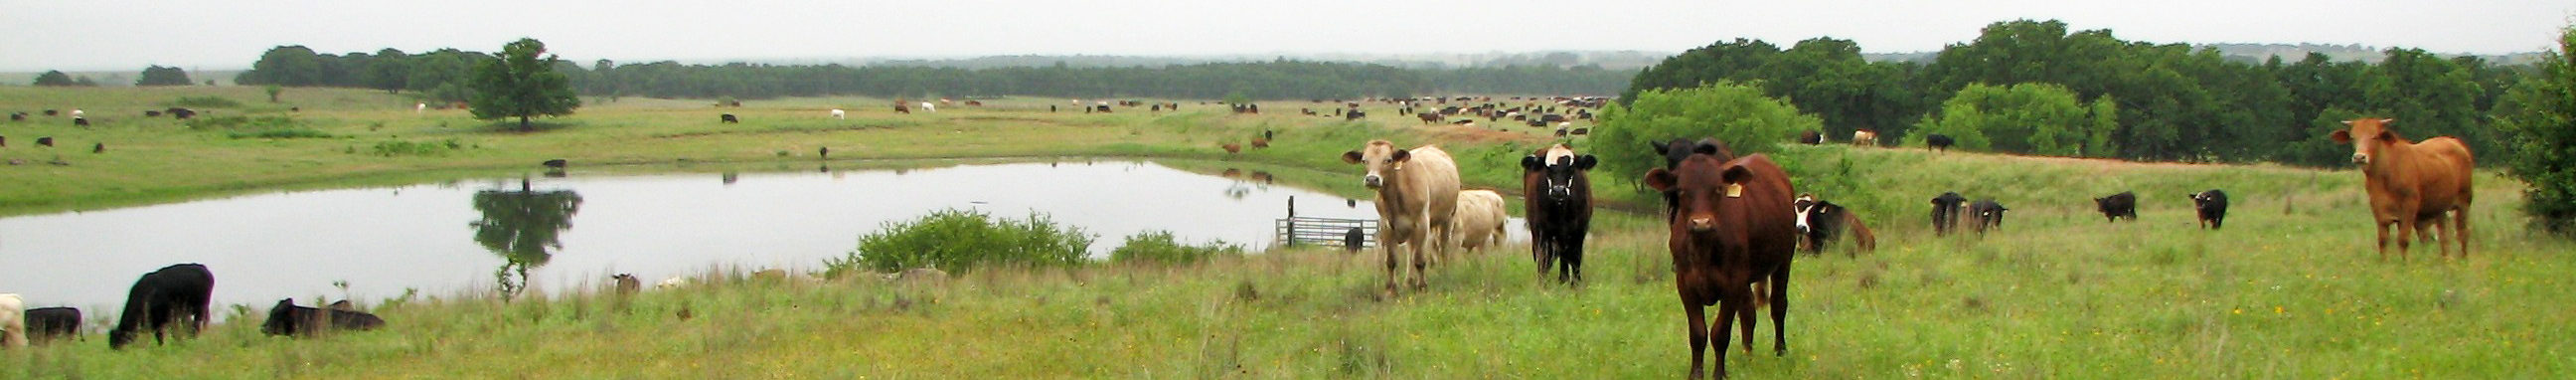 well managed grazing land